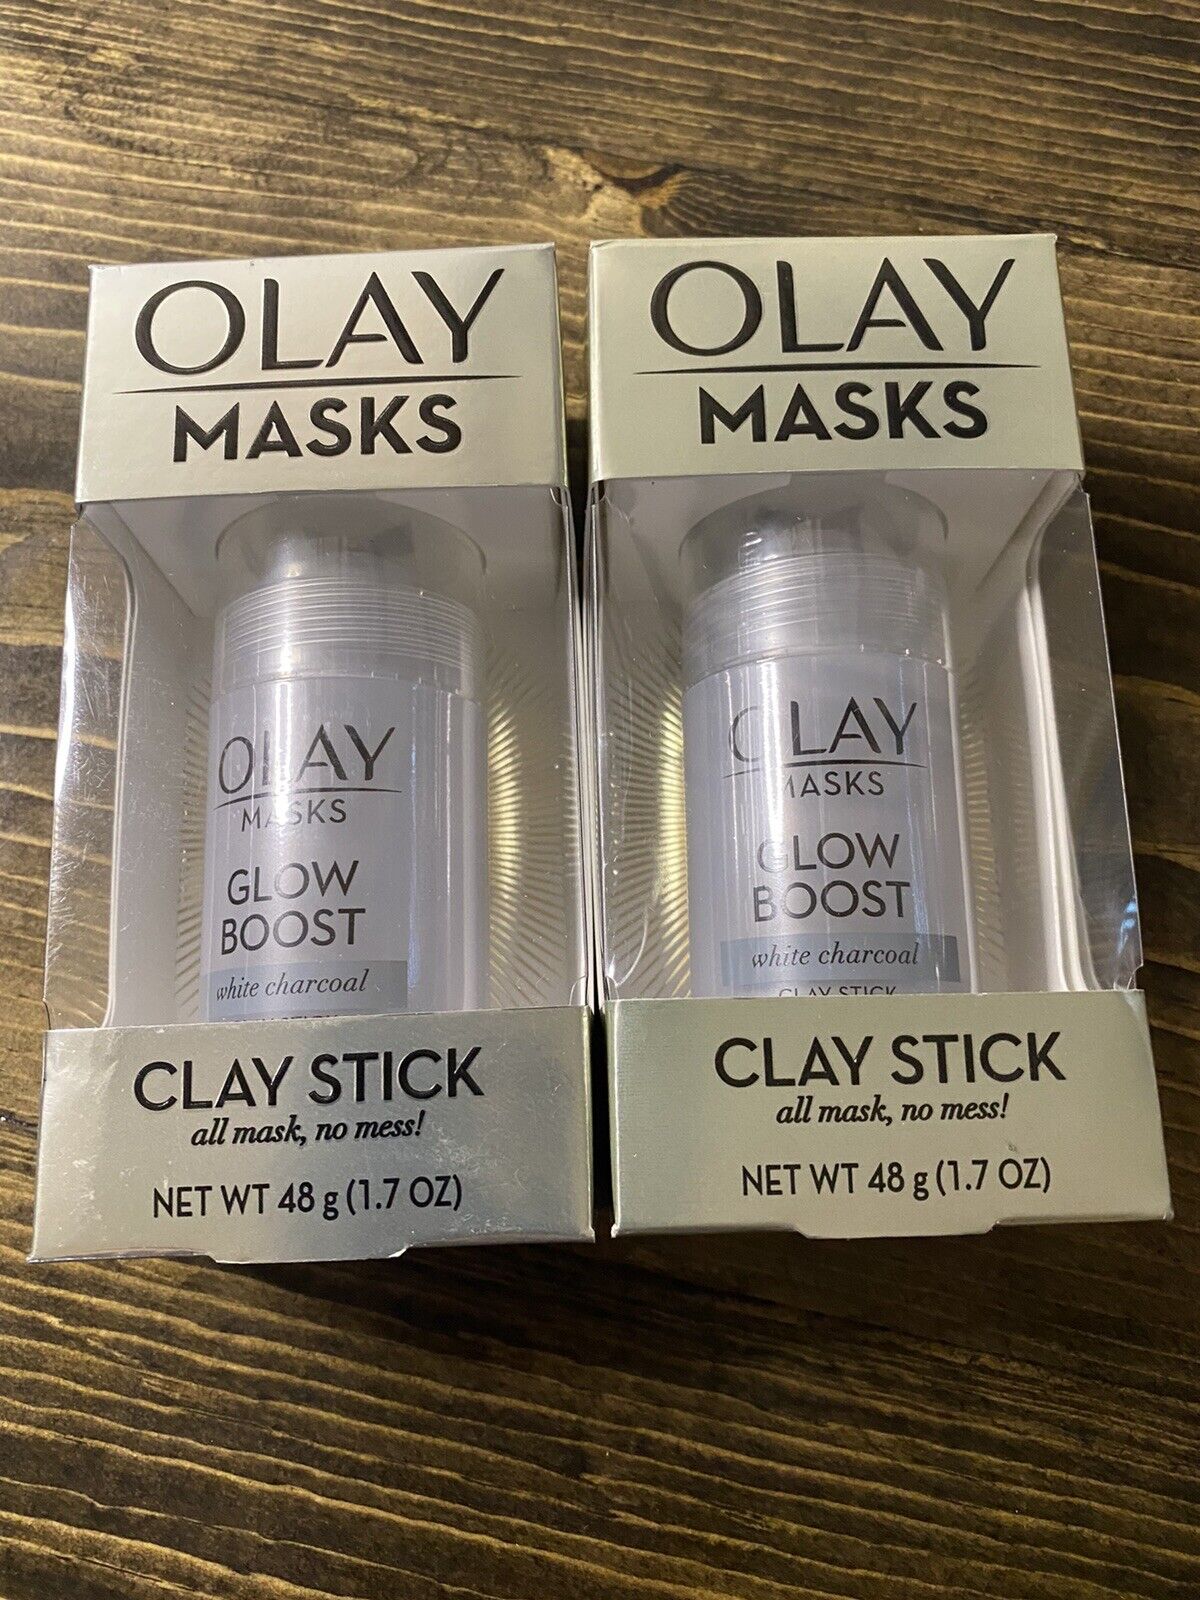 Olay Glow Boost Clay Stick Facial Mask Duo